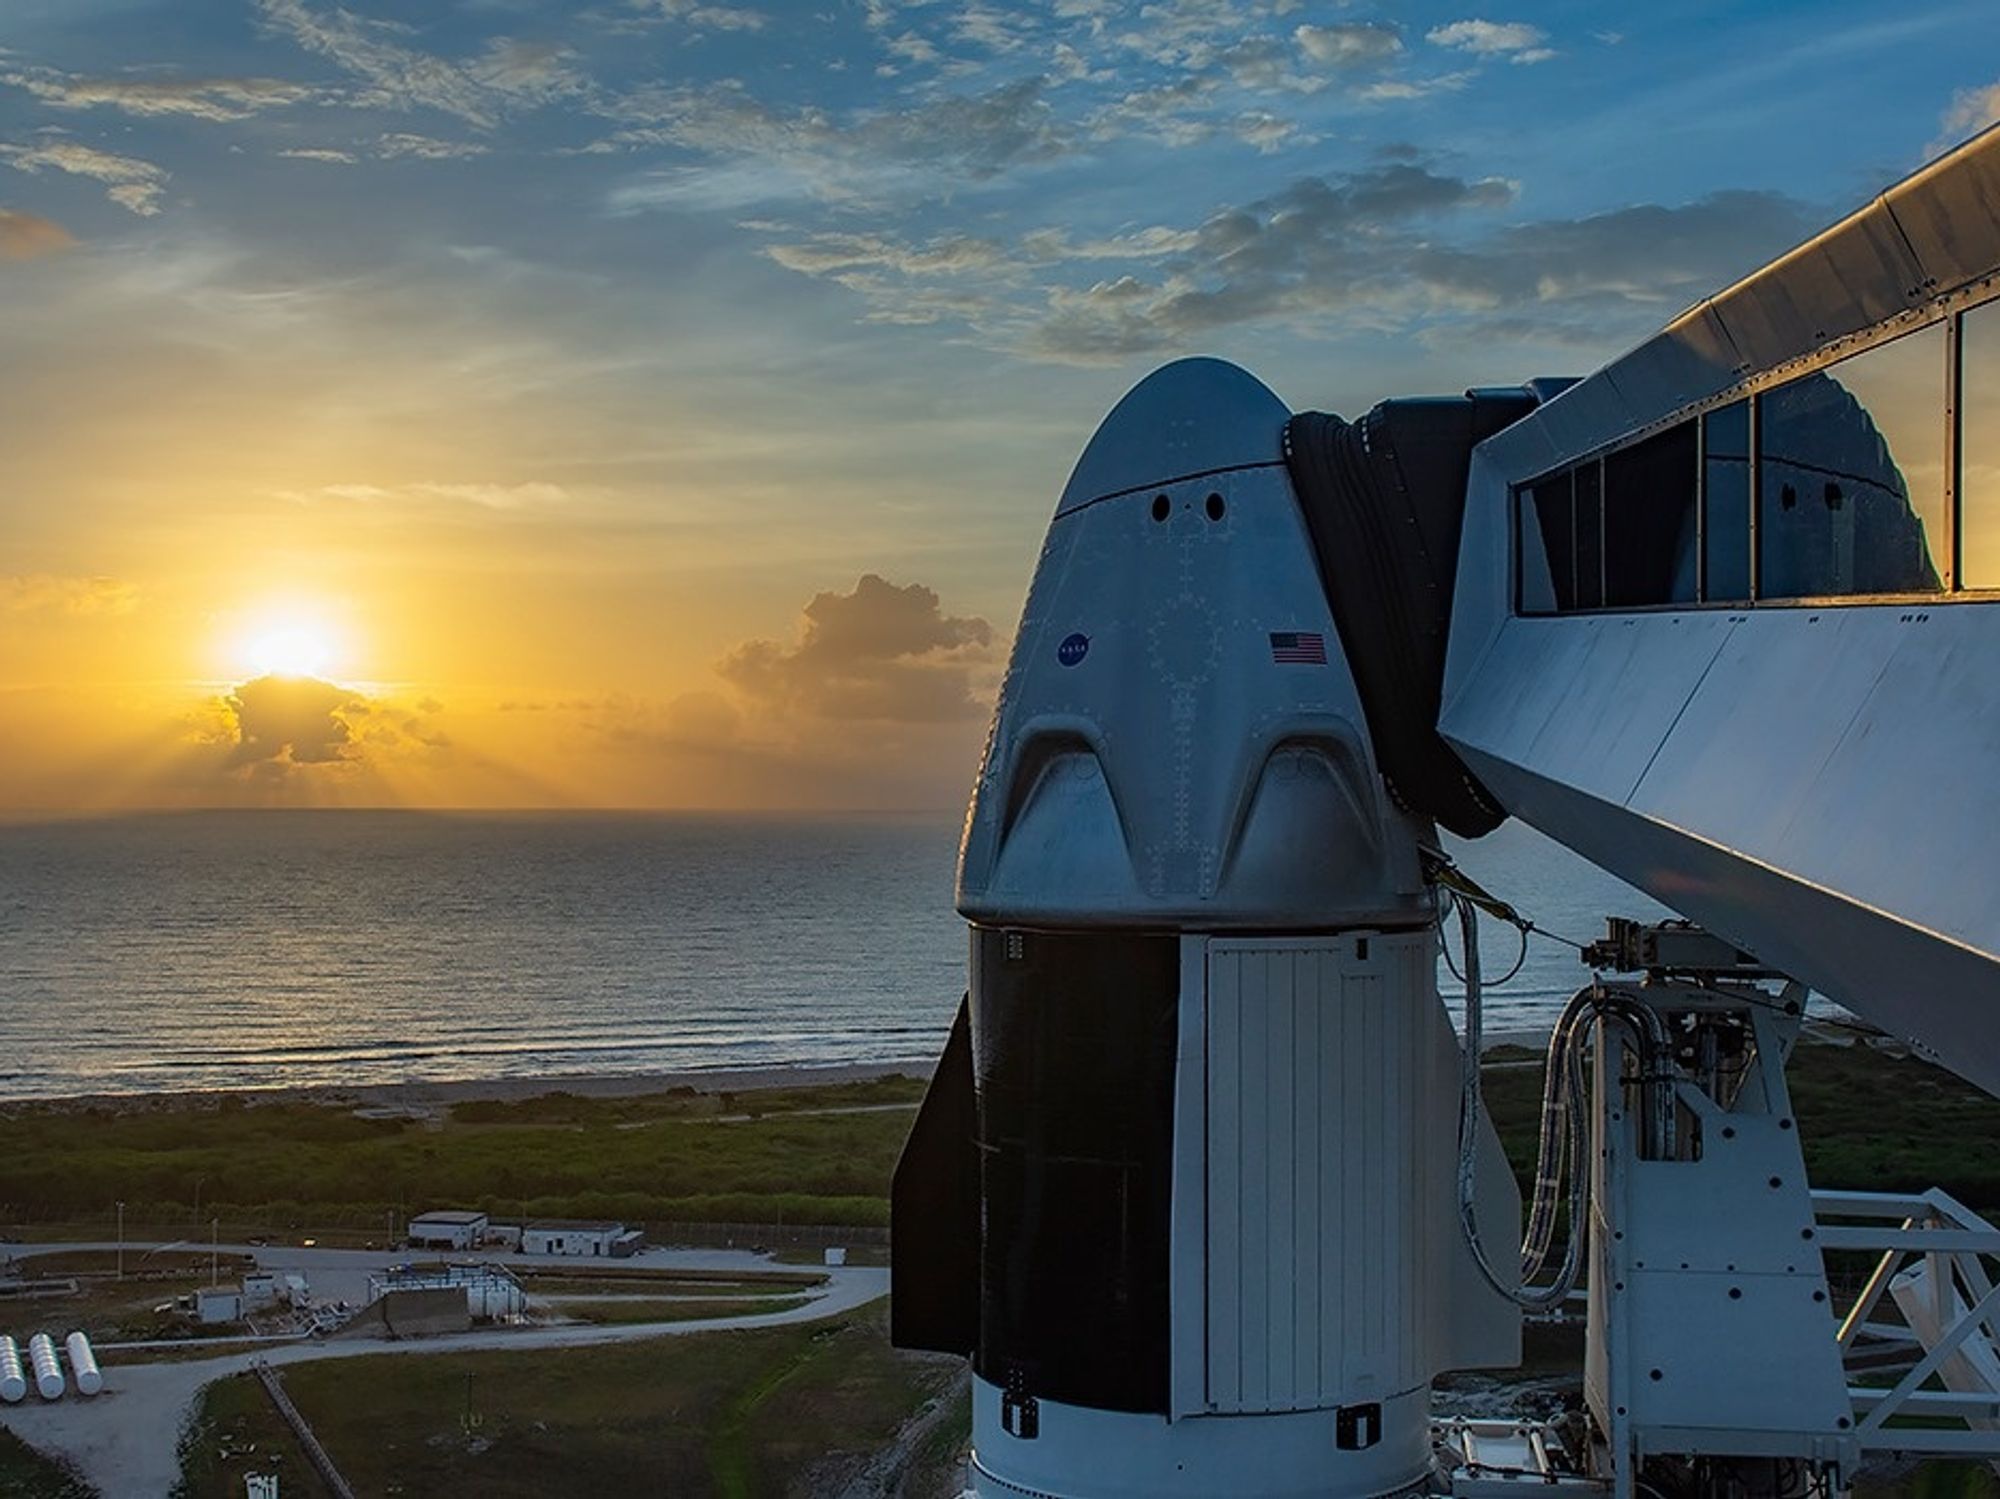 SpaceX Will Launch Four Civilians Into Orbit This Year